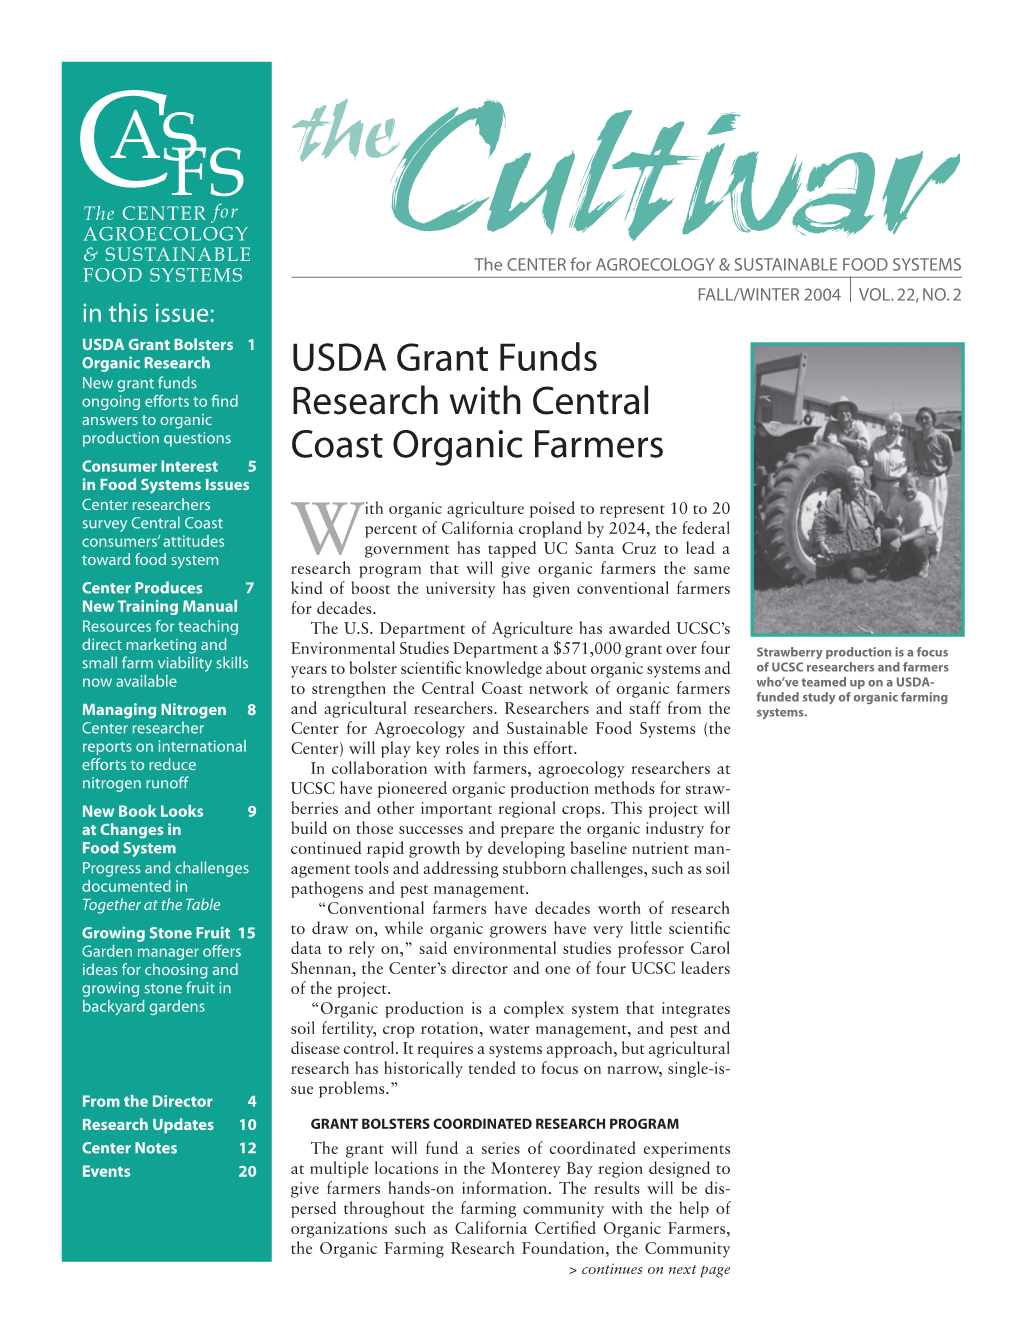 USDA Grant Funds Research with Central Coast Organic Farmers